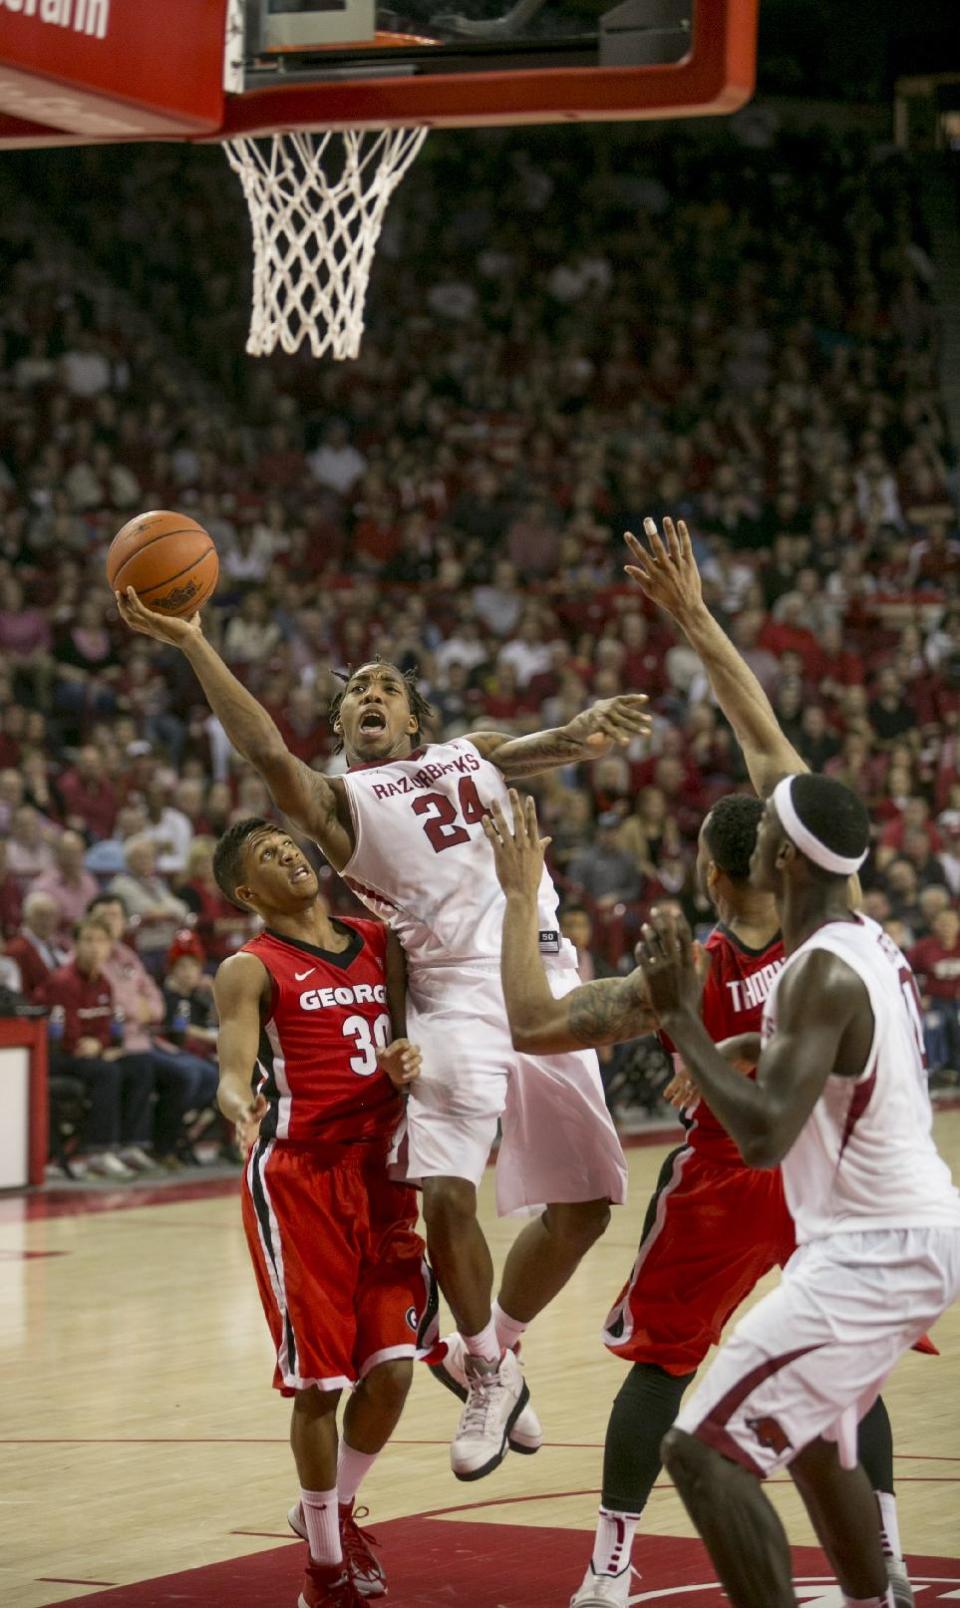 Arkansas guard Michael Qualls (24) leaps around Georgia guard J.J. Frazier (30) during the second half of an NCAA college basketball game on Saturday, March 1, 2014, in Fayetteville, Ark. Arkansas defeated 87-75. (AP Photo/Gareth Patterson)